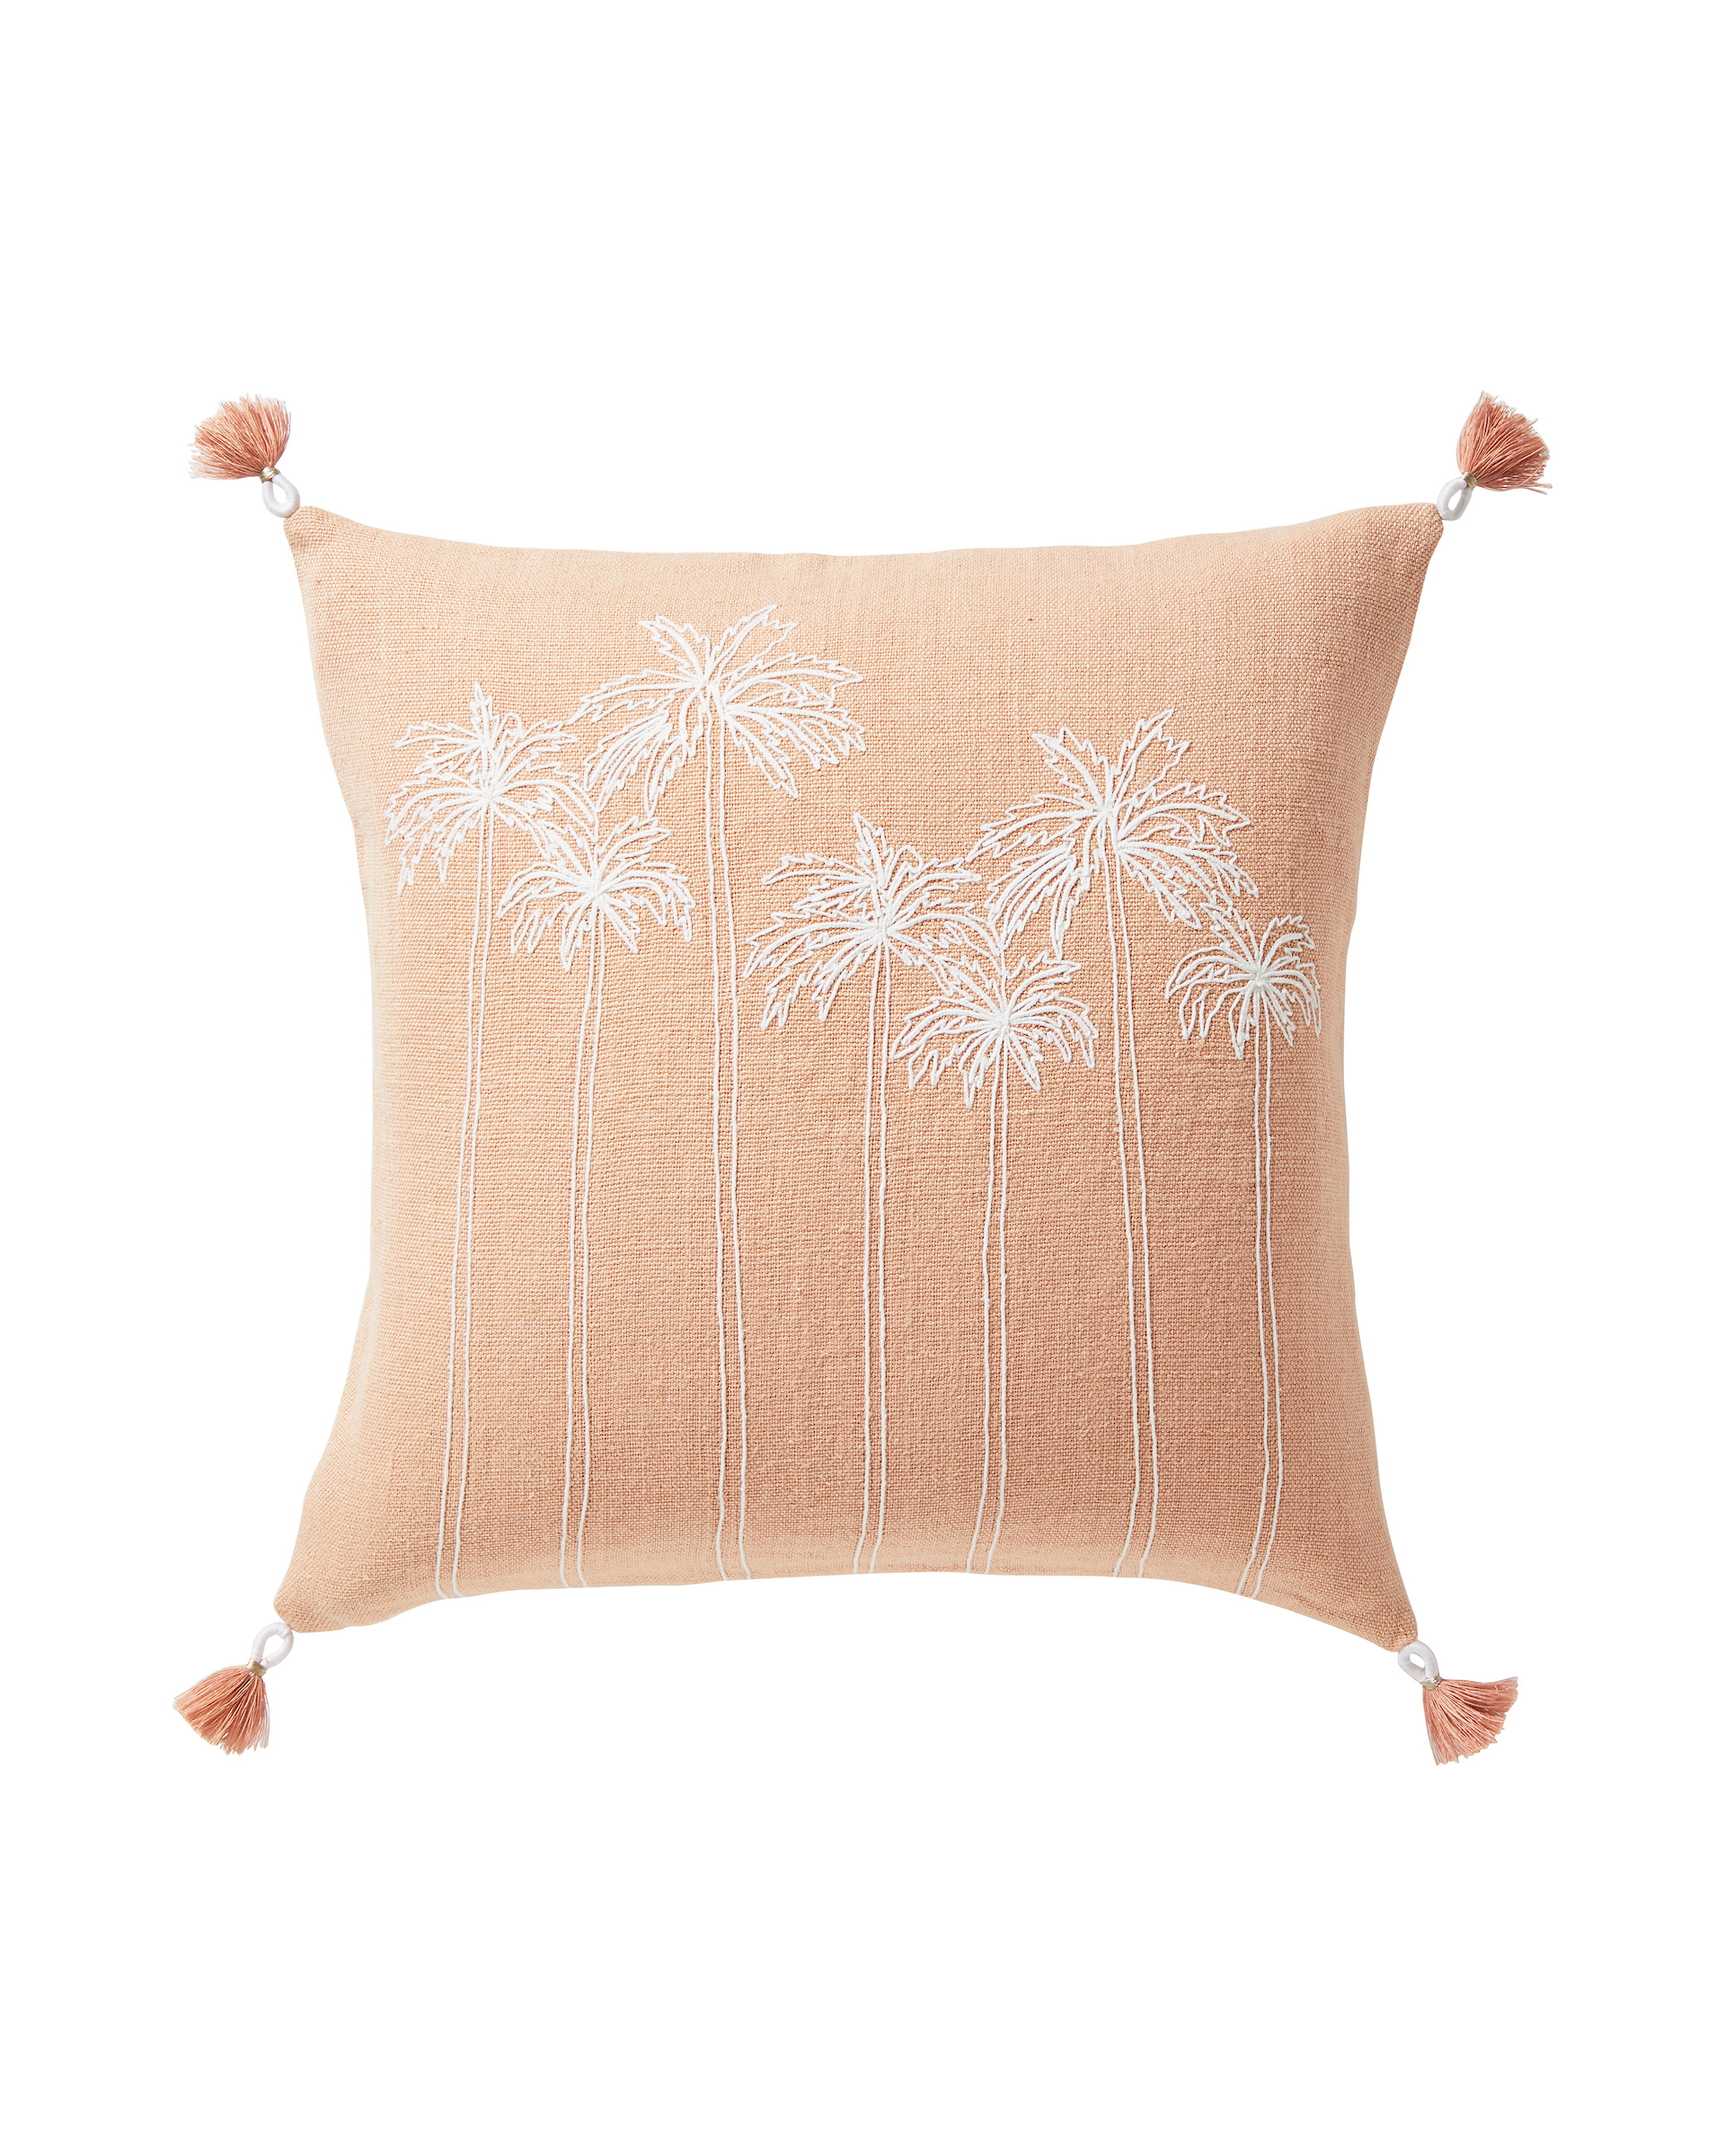 Seabreeze Pillow Cover